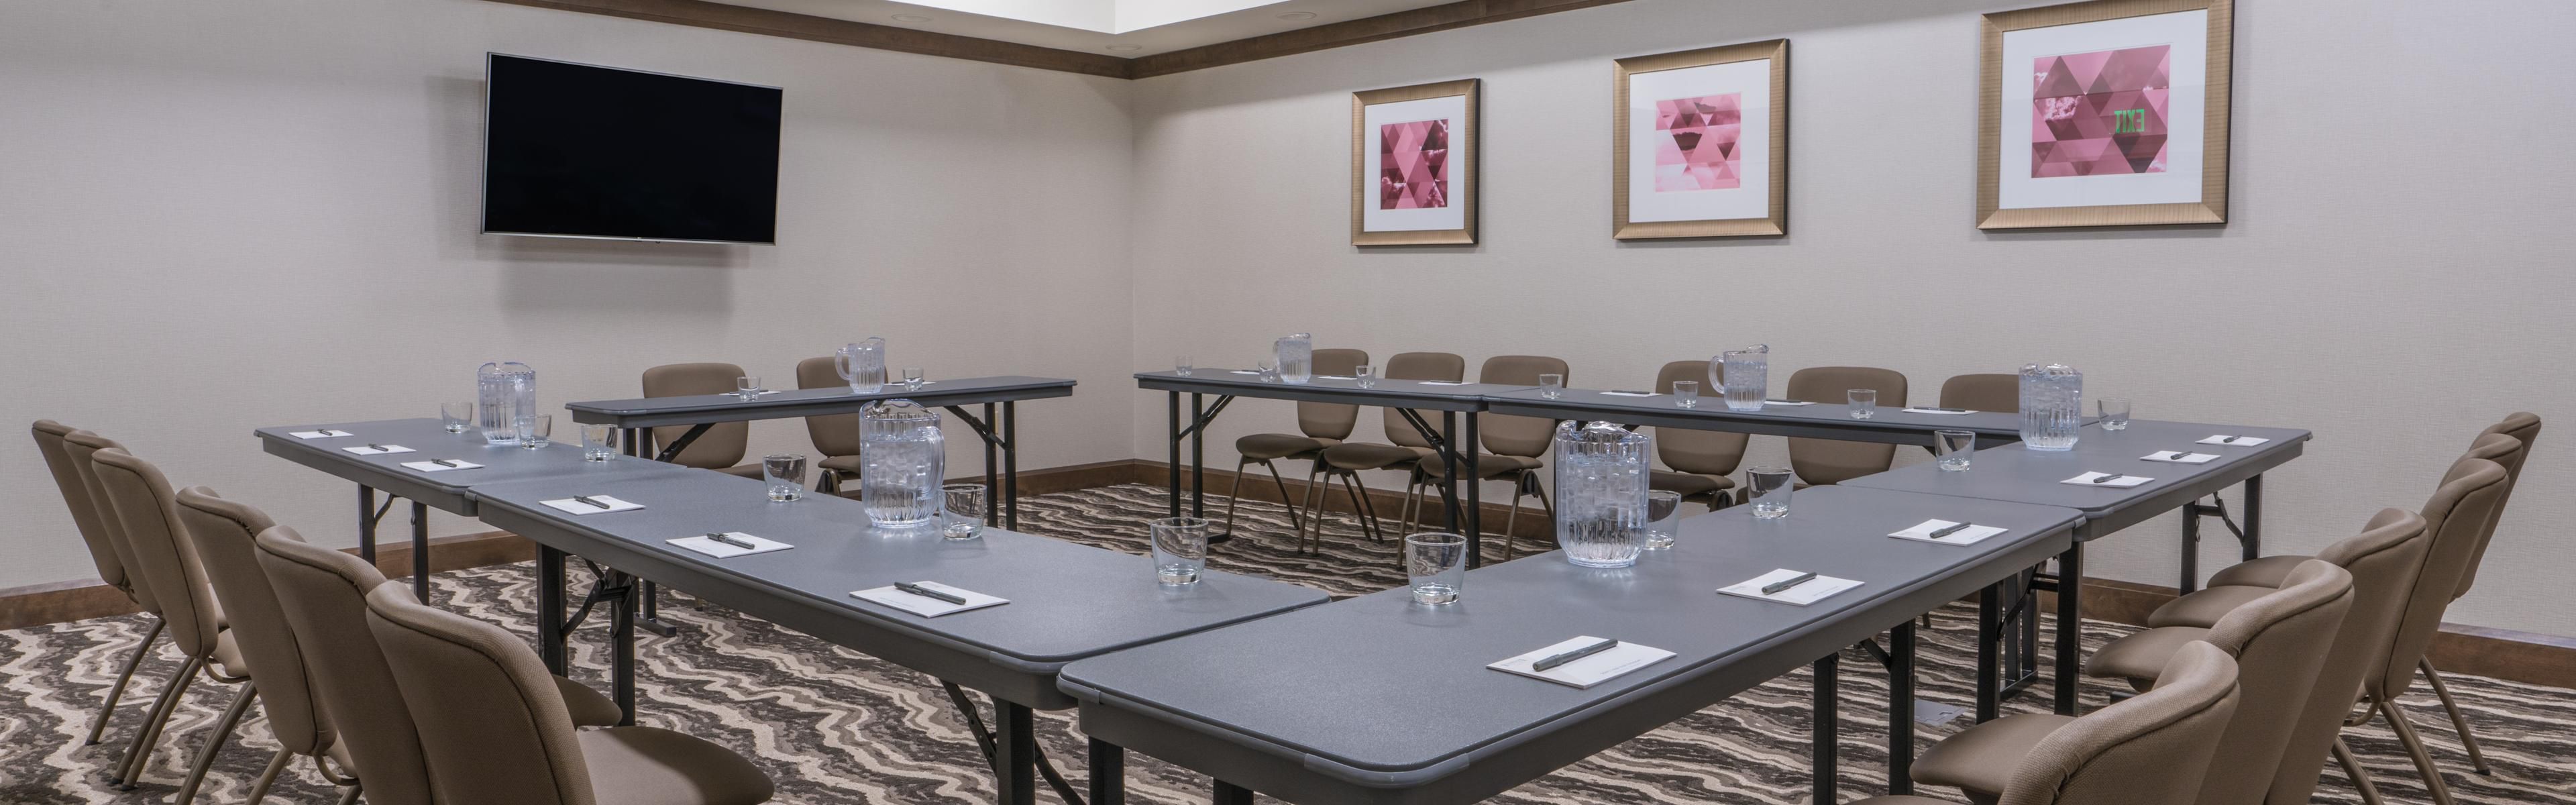 Meeting Room - meetings for up to 20 attendees